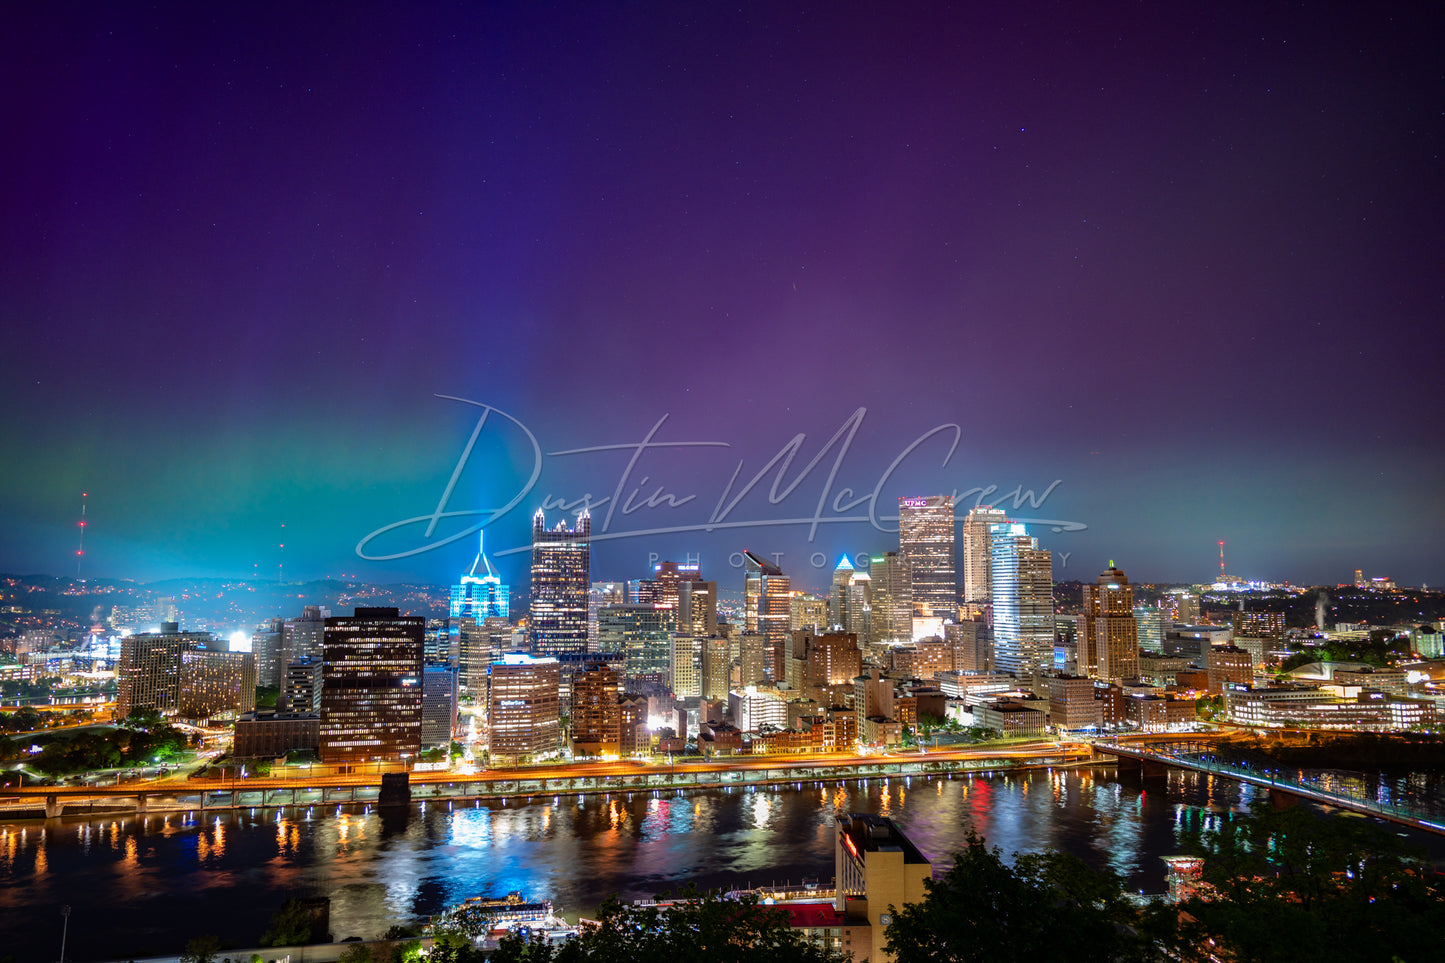 Northern Lights Over Pittsburgh